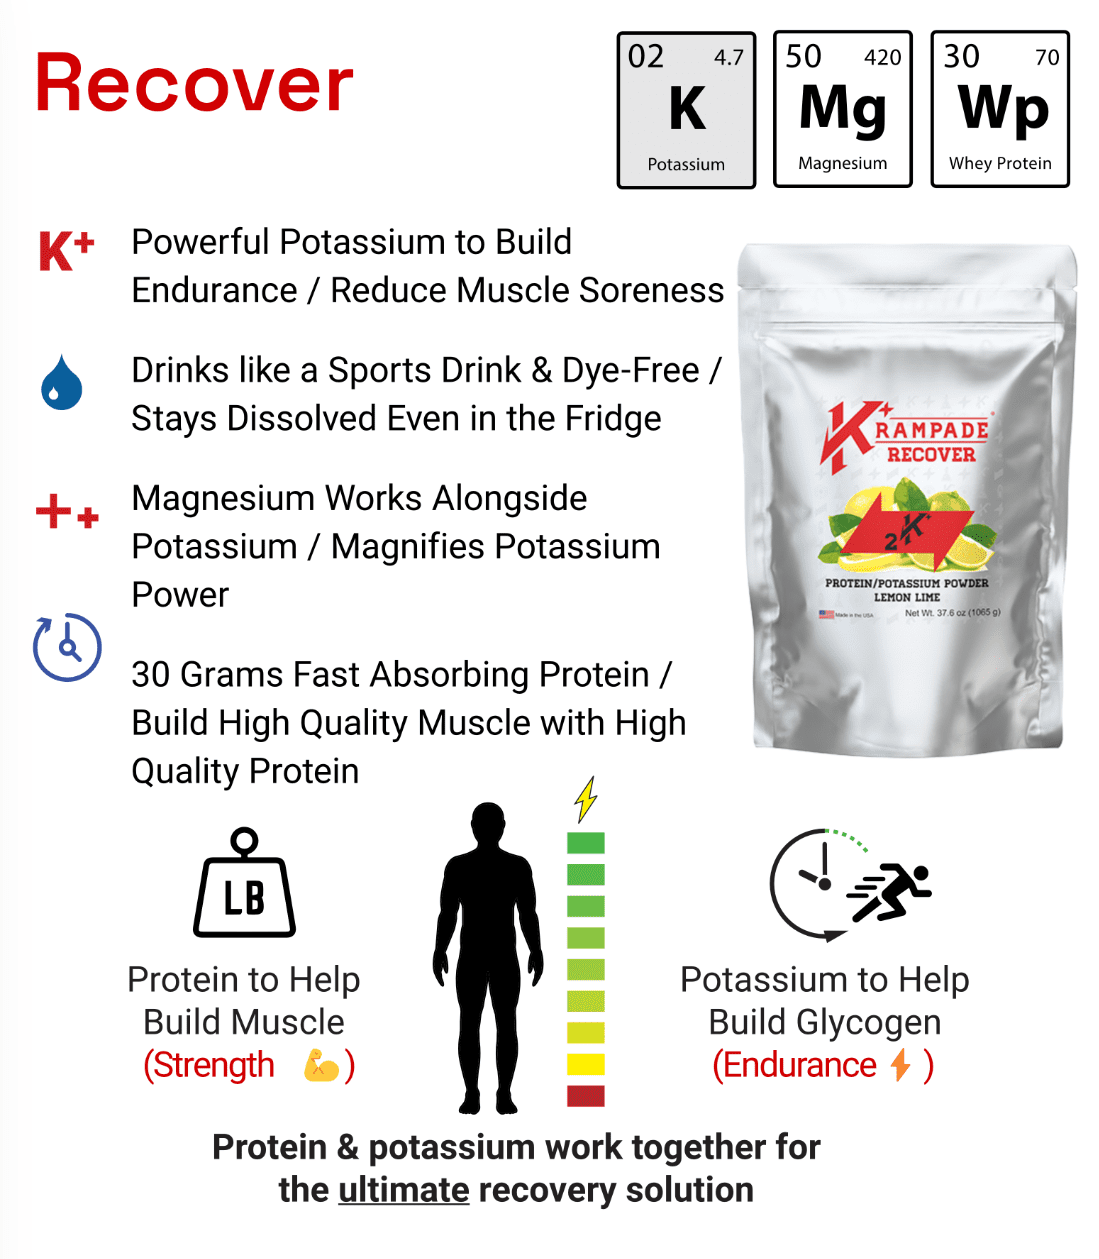 Krampade Recover Synergizes Protein and Potassium for Maximum Recovery, Increasing Muscle Strength and Muscle Endurance in a Single Product.